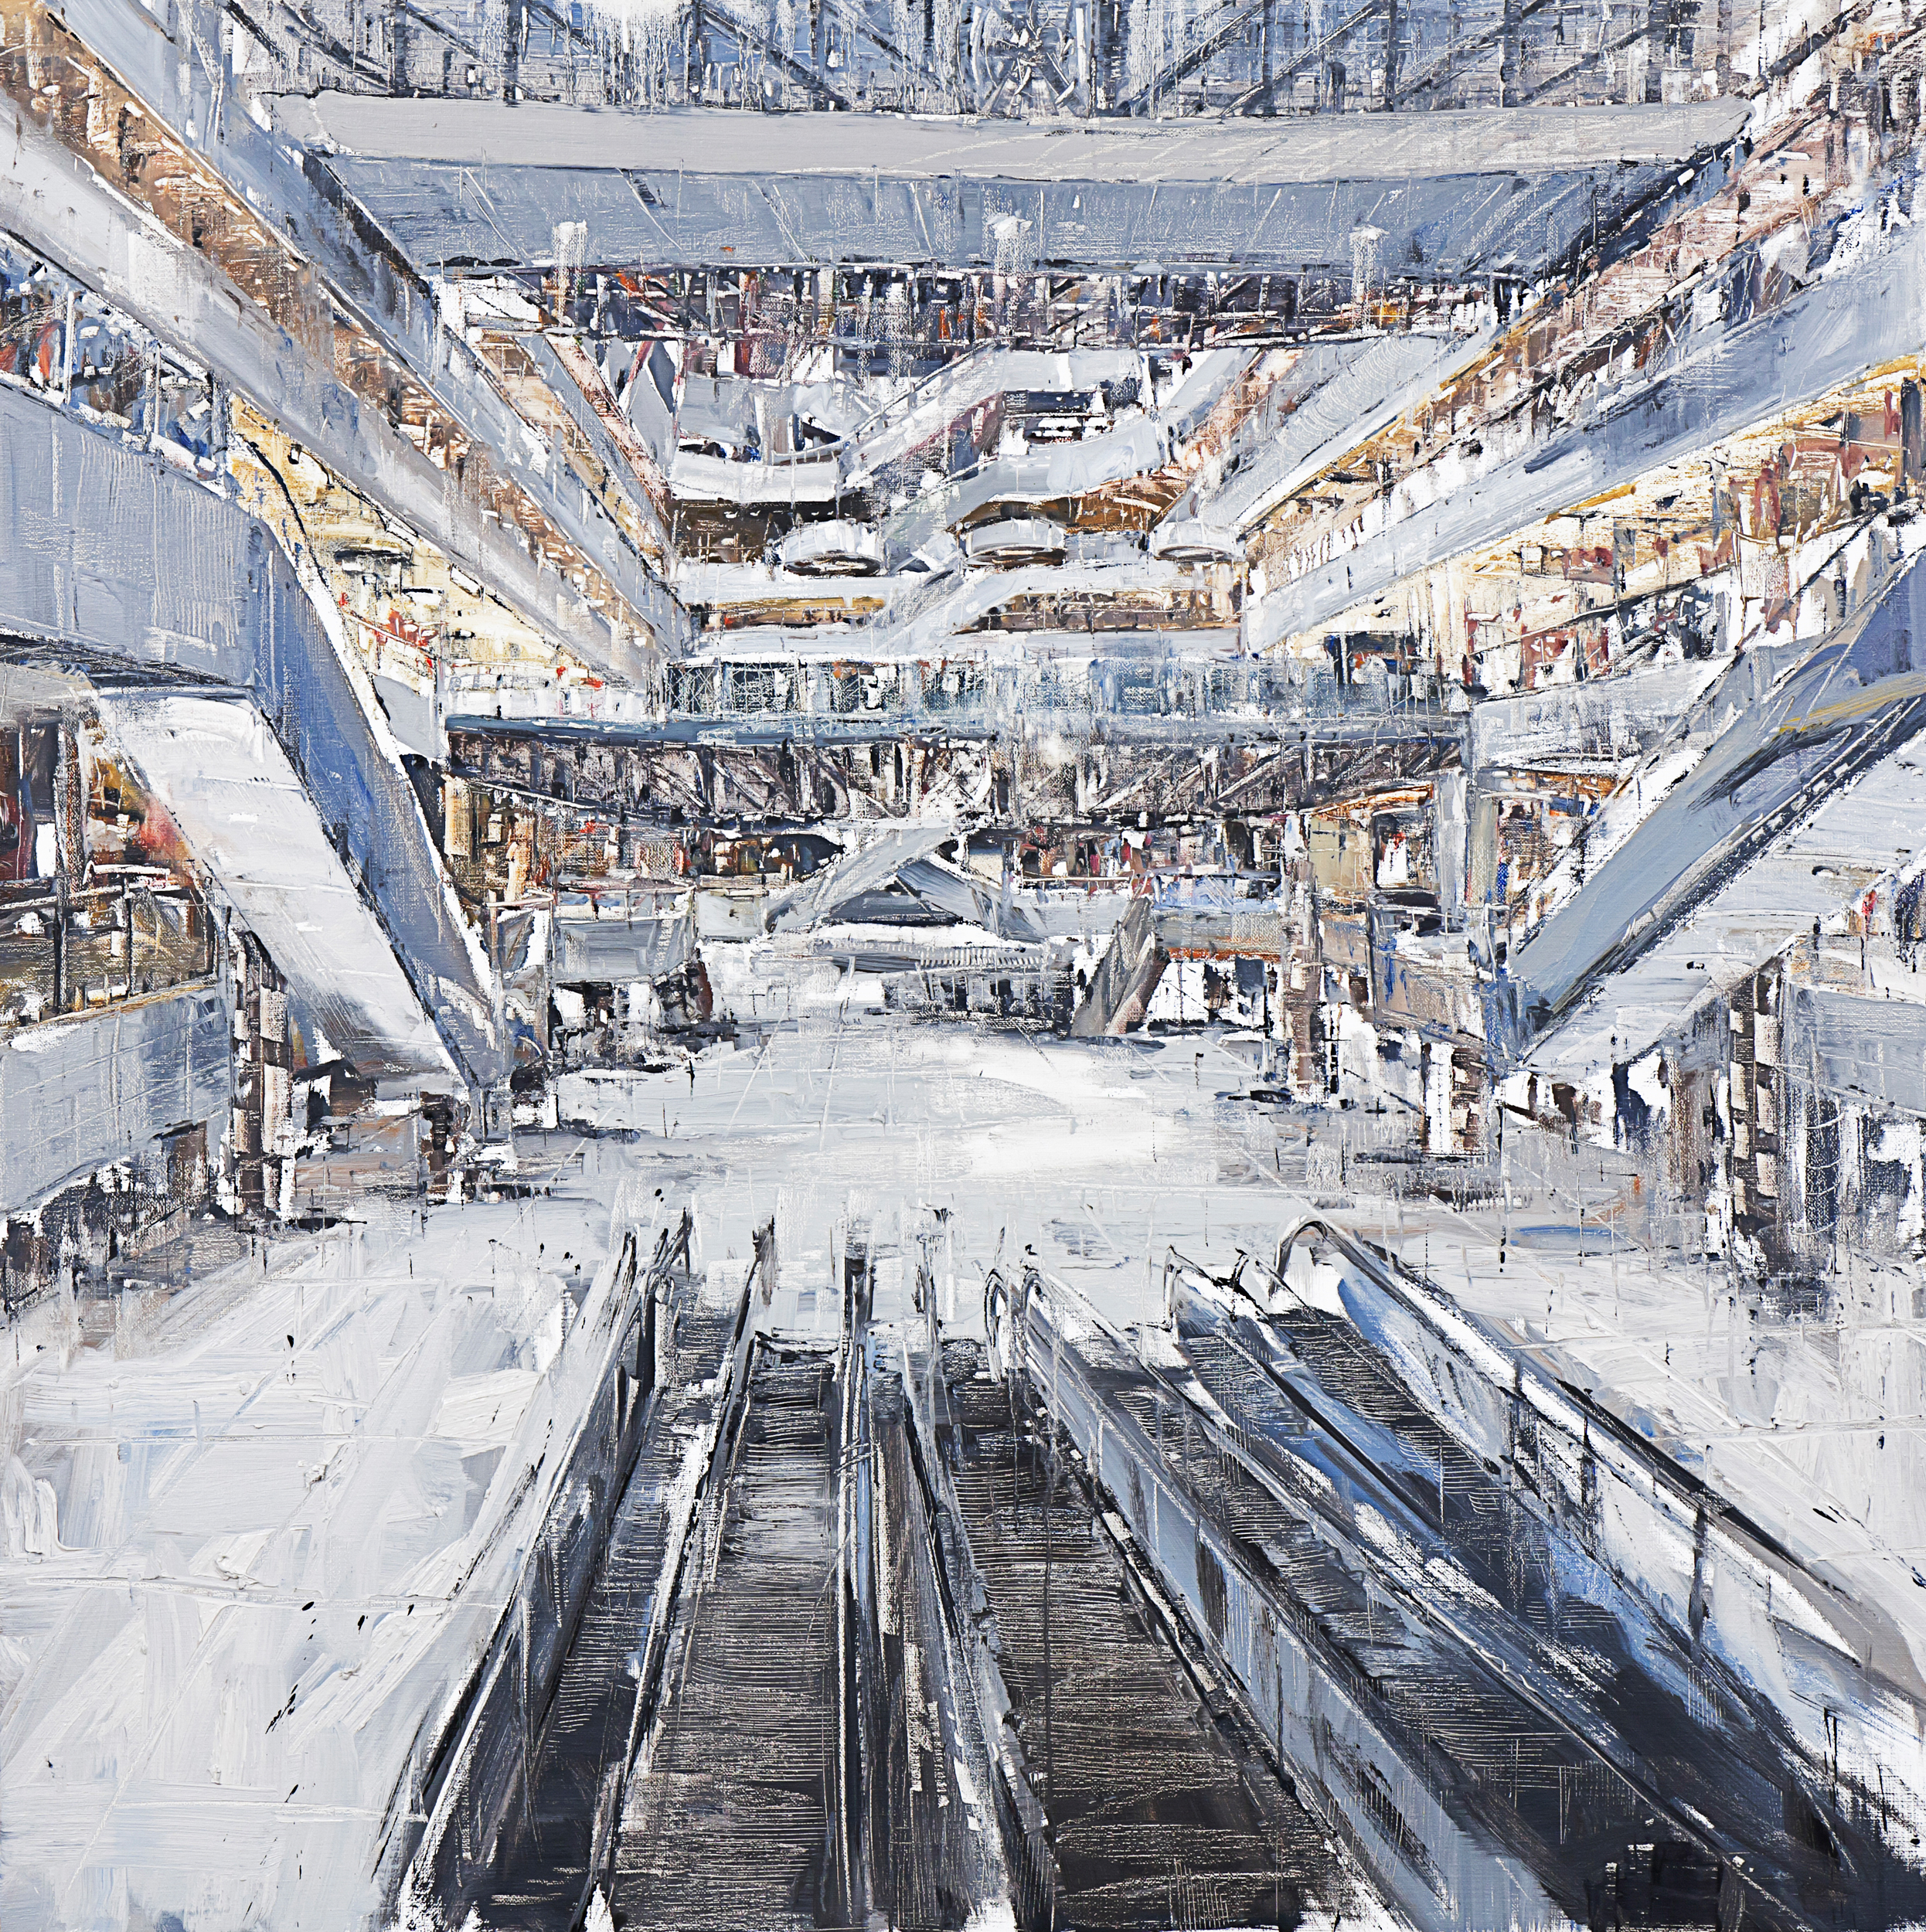    The Mall #19  , 2011 oil on canvas  artist / client:  Boo Sze Yang  